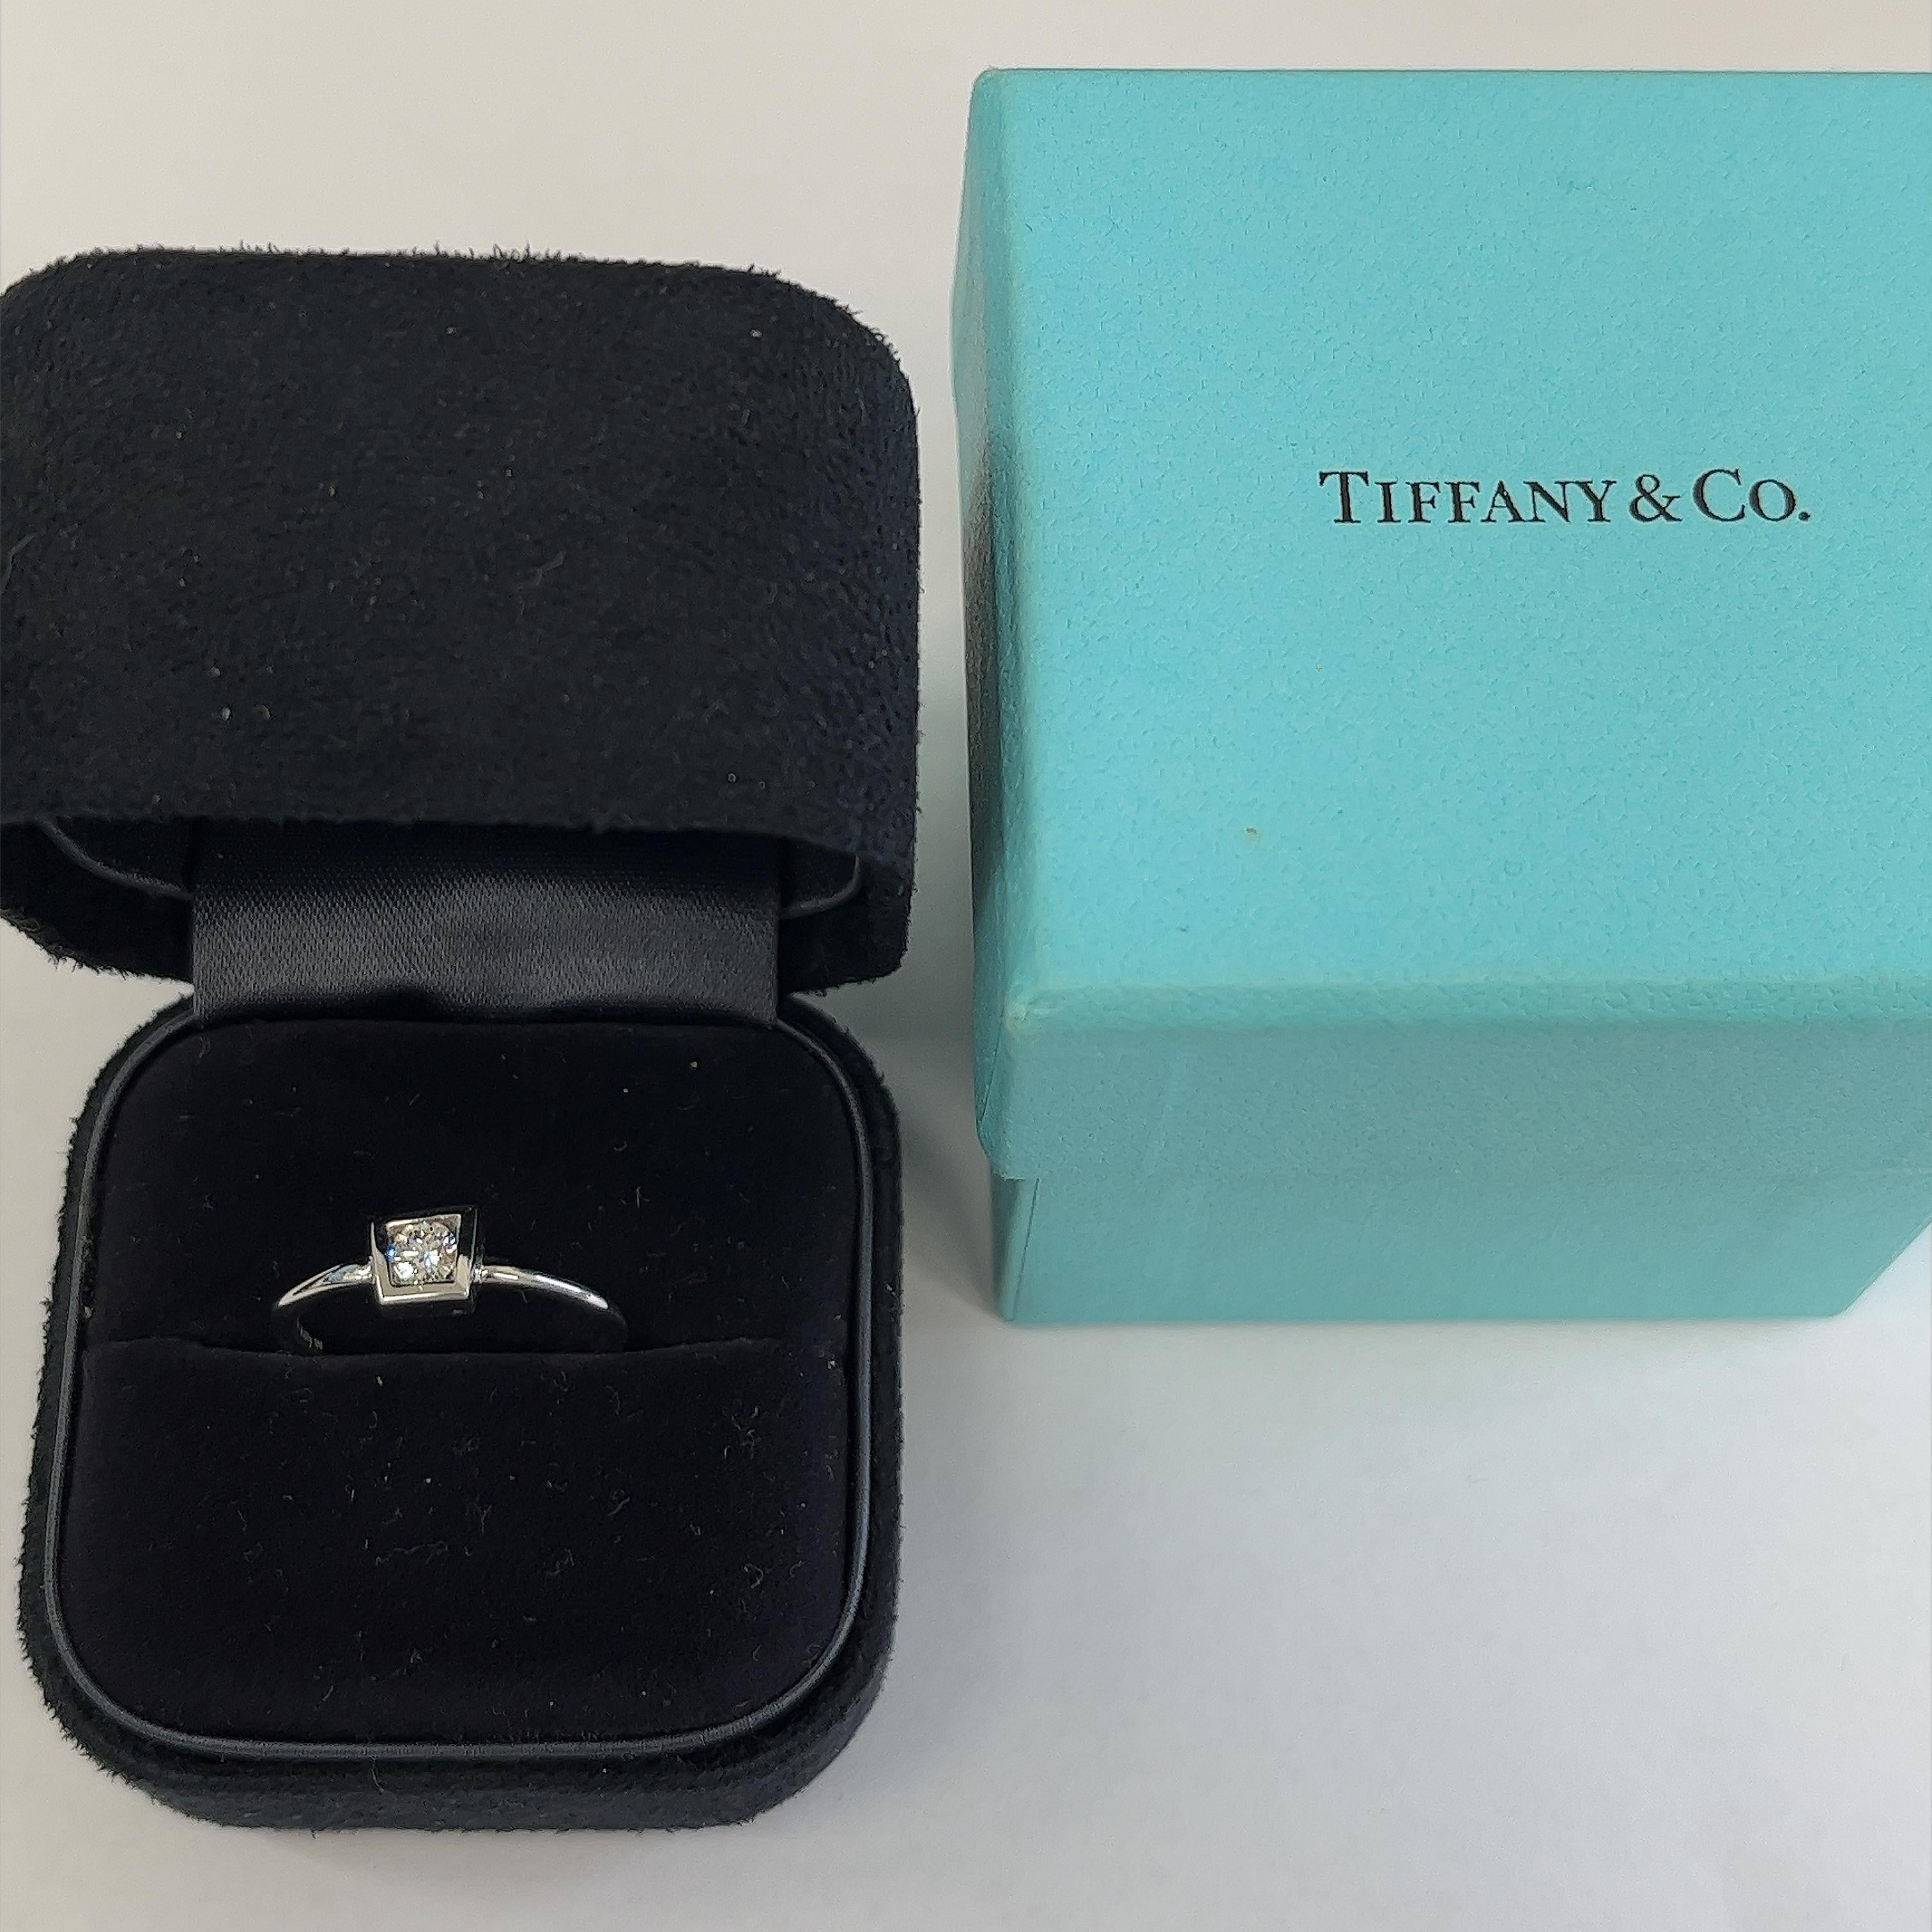 Tiffany & Co. Frank Gehry Solitaire Ring in 18ct White Gold with 0.15ct diamond For Sale 1